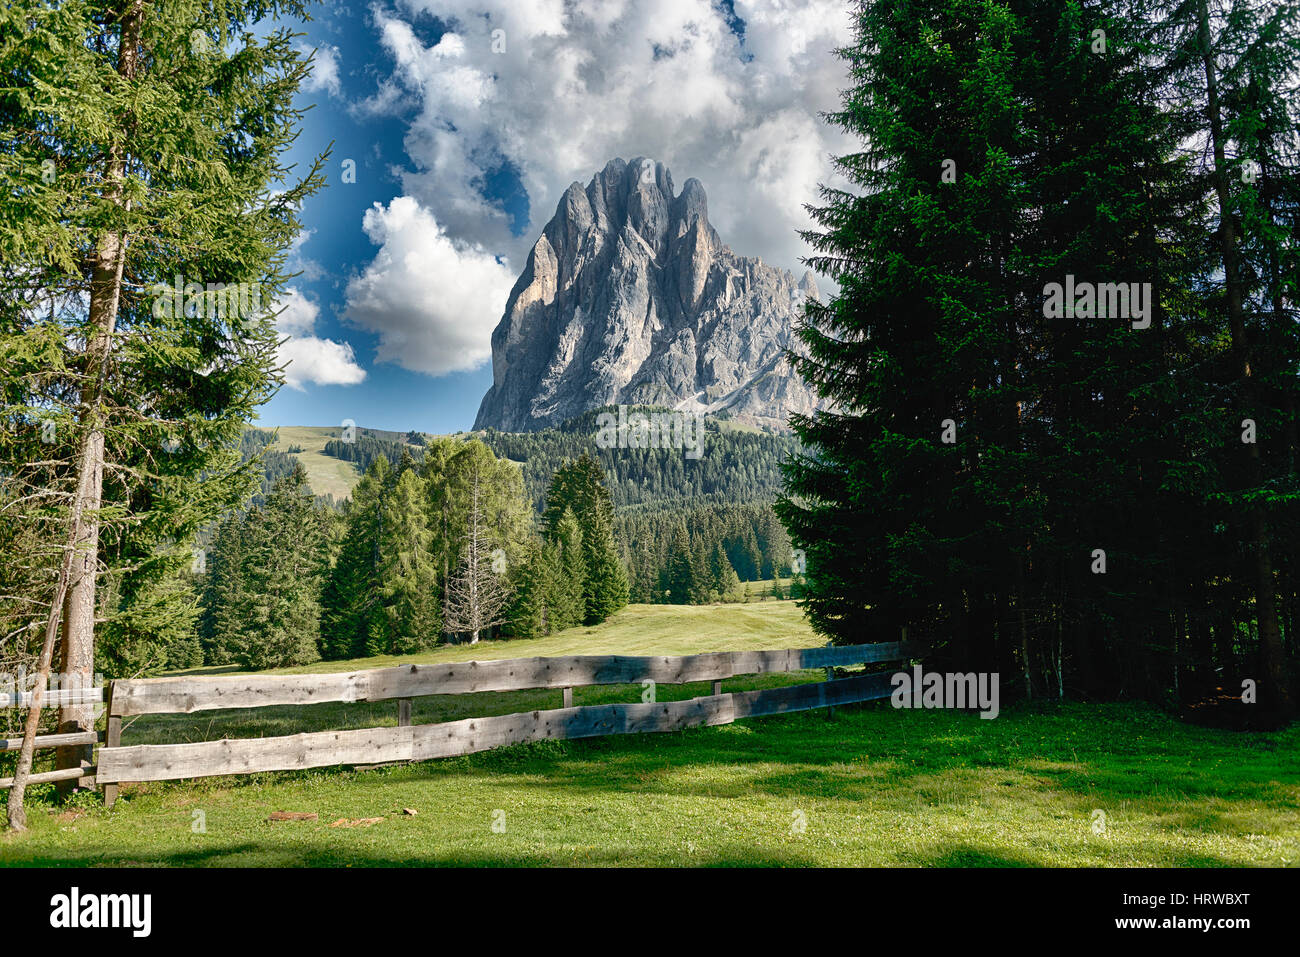 lawn with fence and trees in the foreground and in the background the Sassolungo mountain with partly cloudy sky Stock Photo